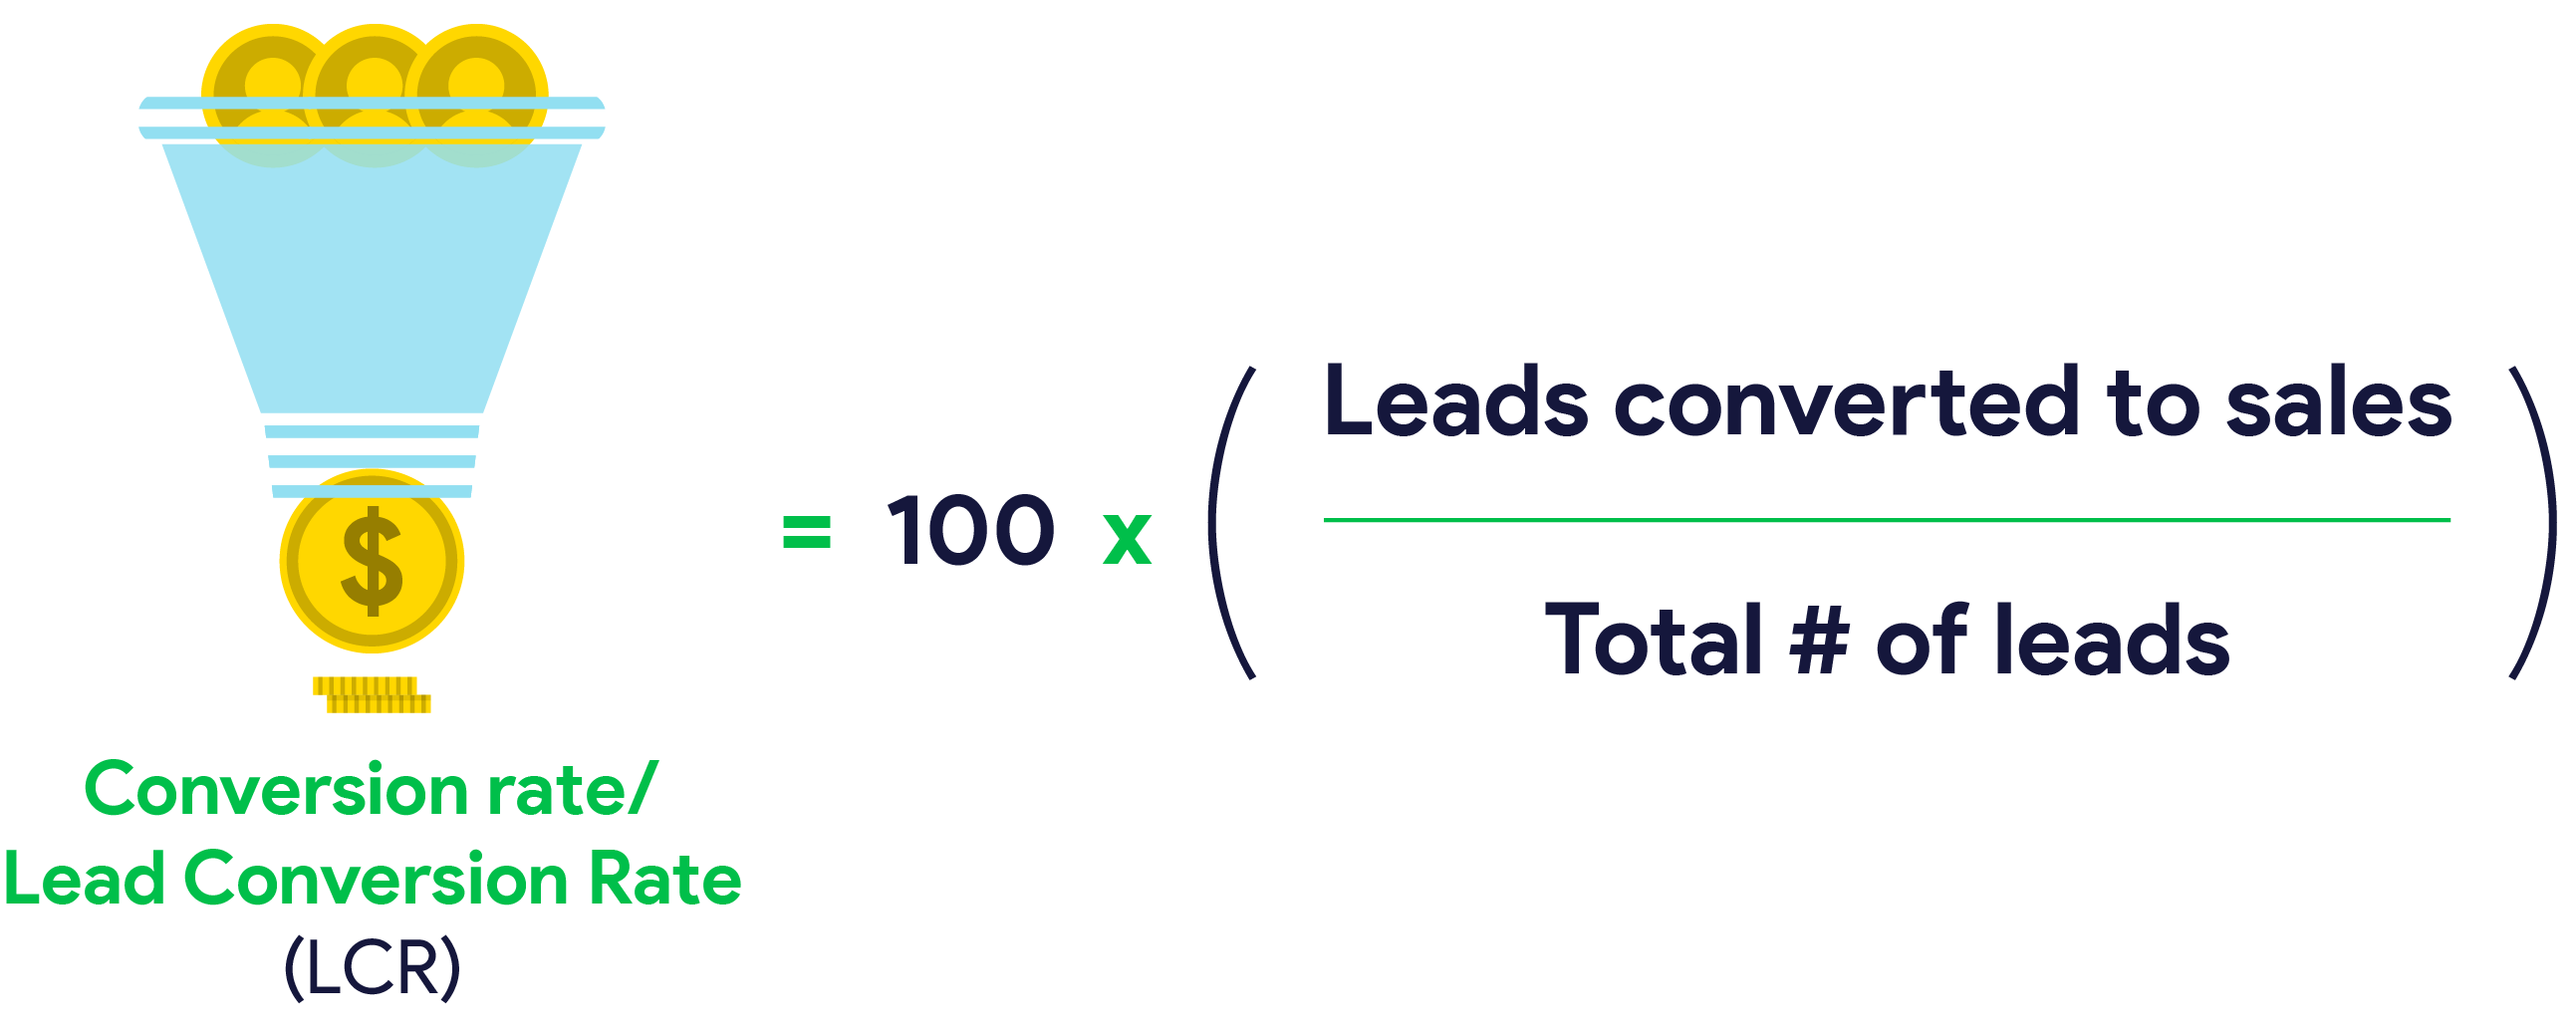 Conversion rate Lead Conversion Rate